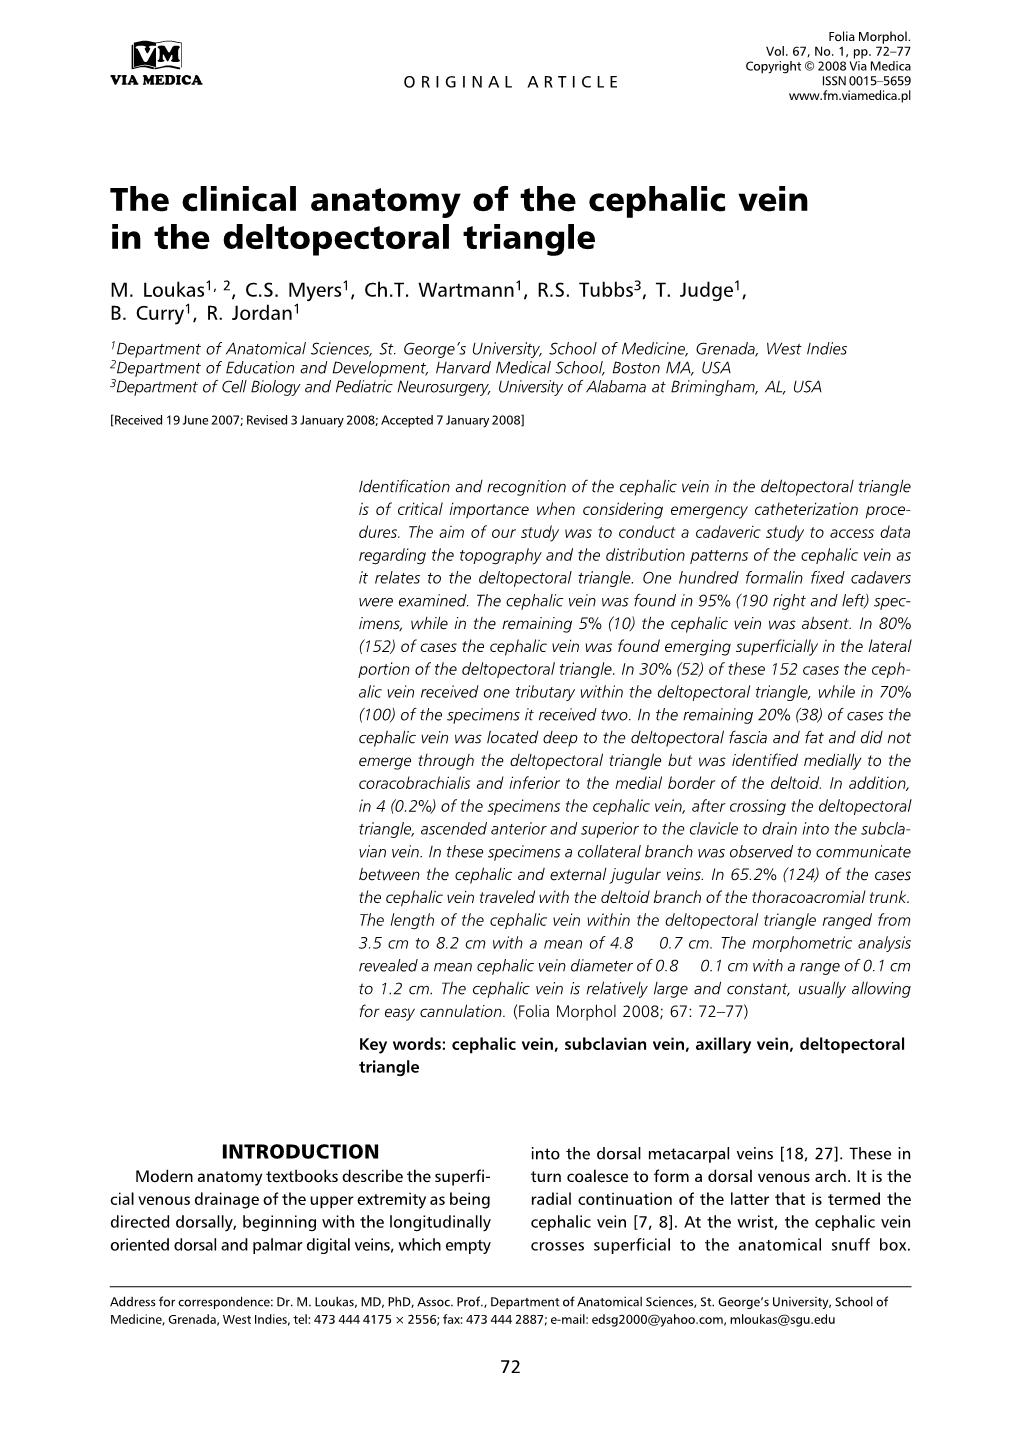 The Clinical Anatomy of the Cephalic Vein in the Deltopectoral Triangle